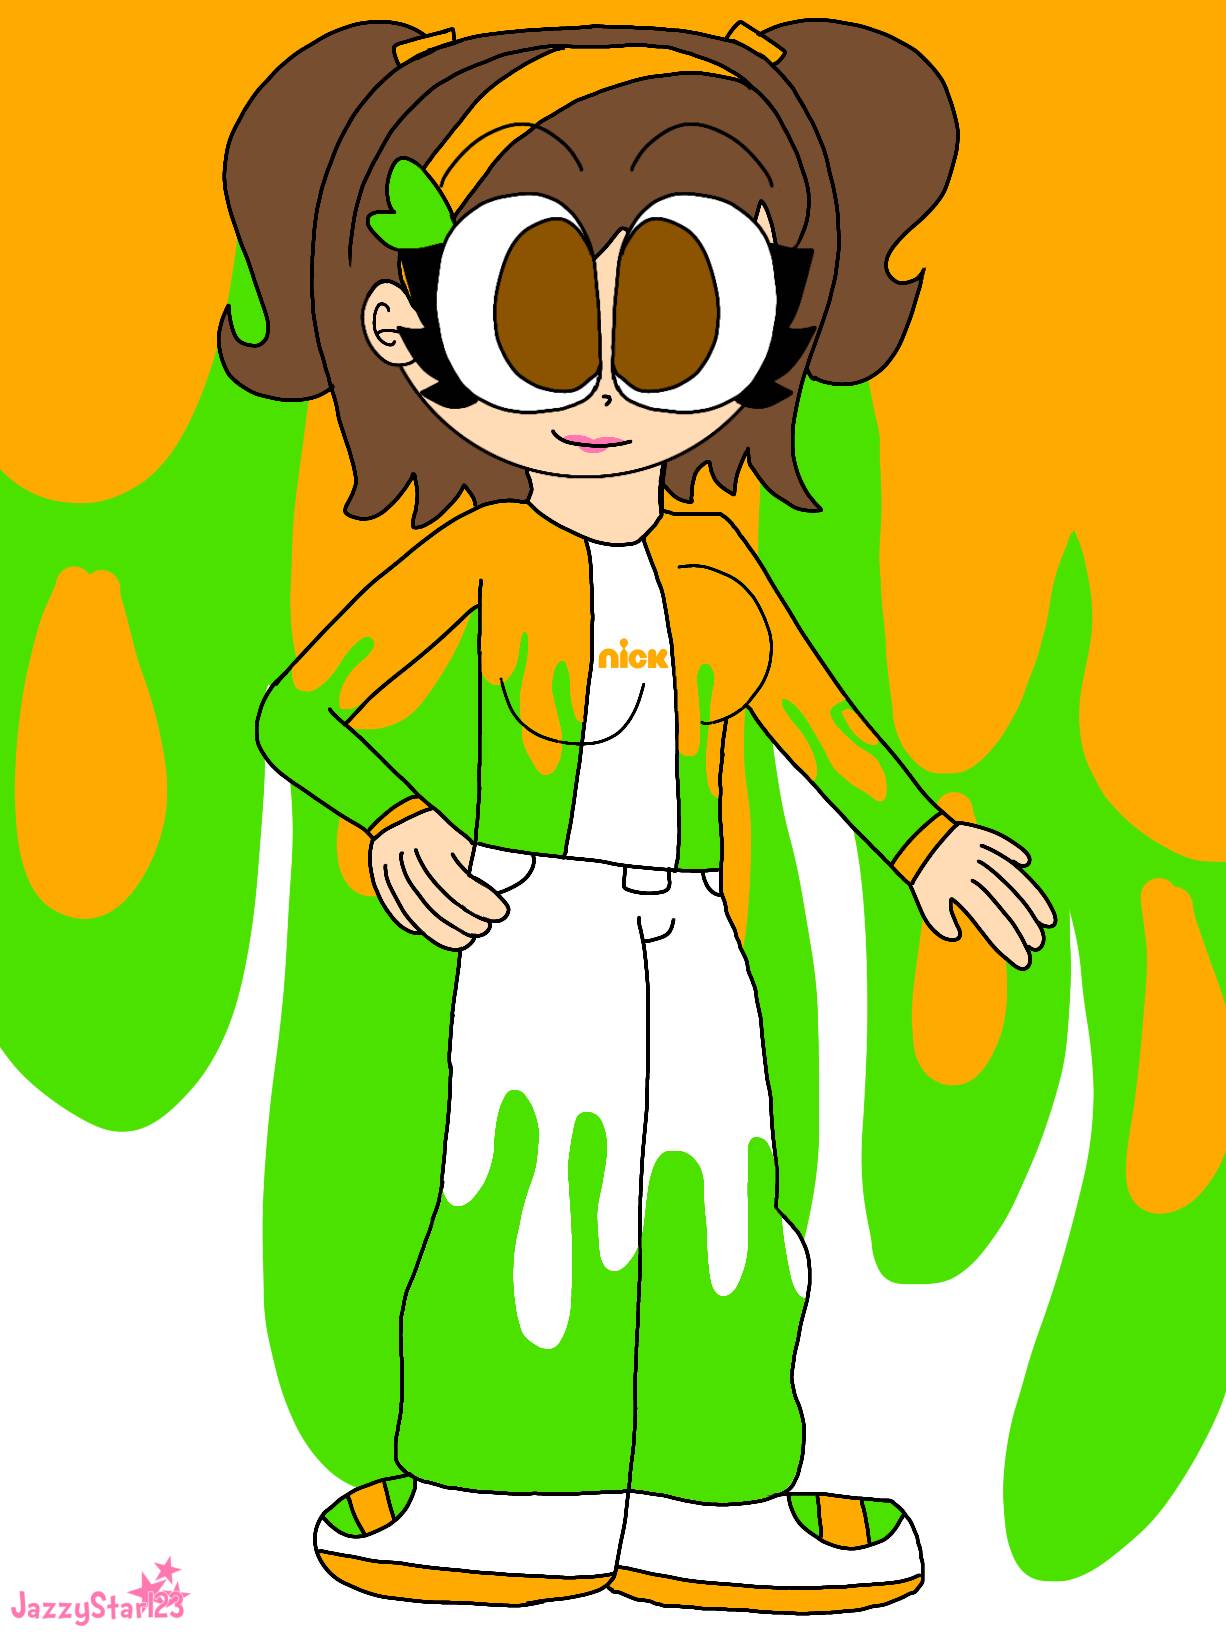 My Nickelodeon Outfit by Jazzystar123 on DeviantArt